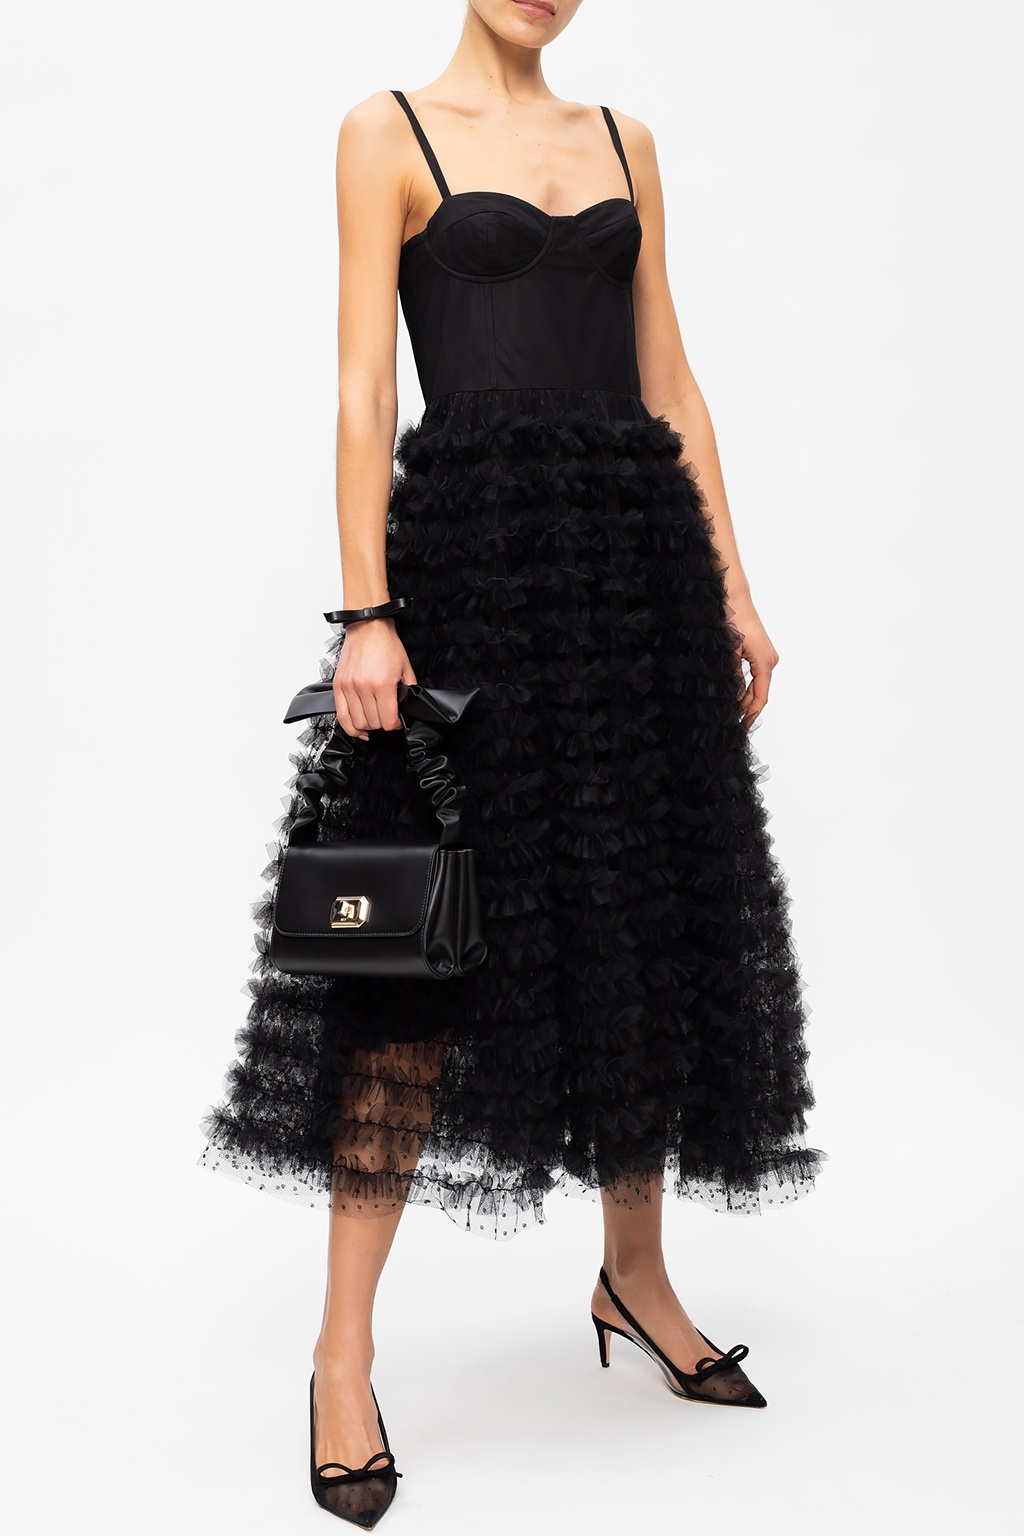 Red Valentino Tulle dress with corset ...